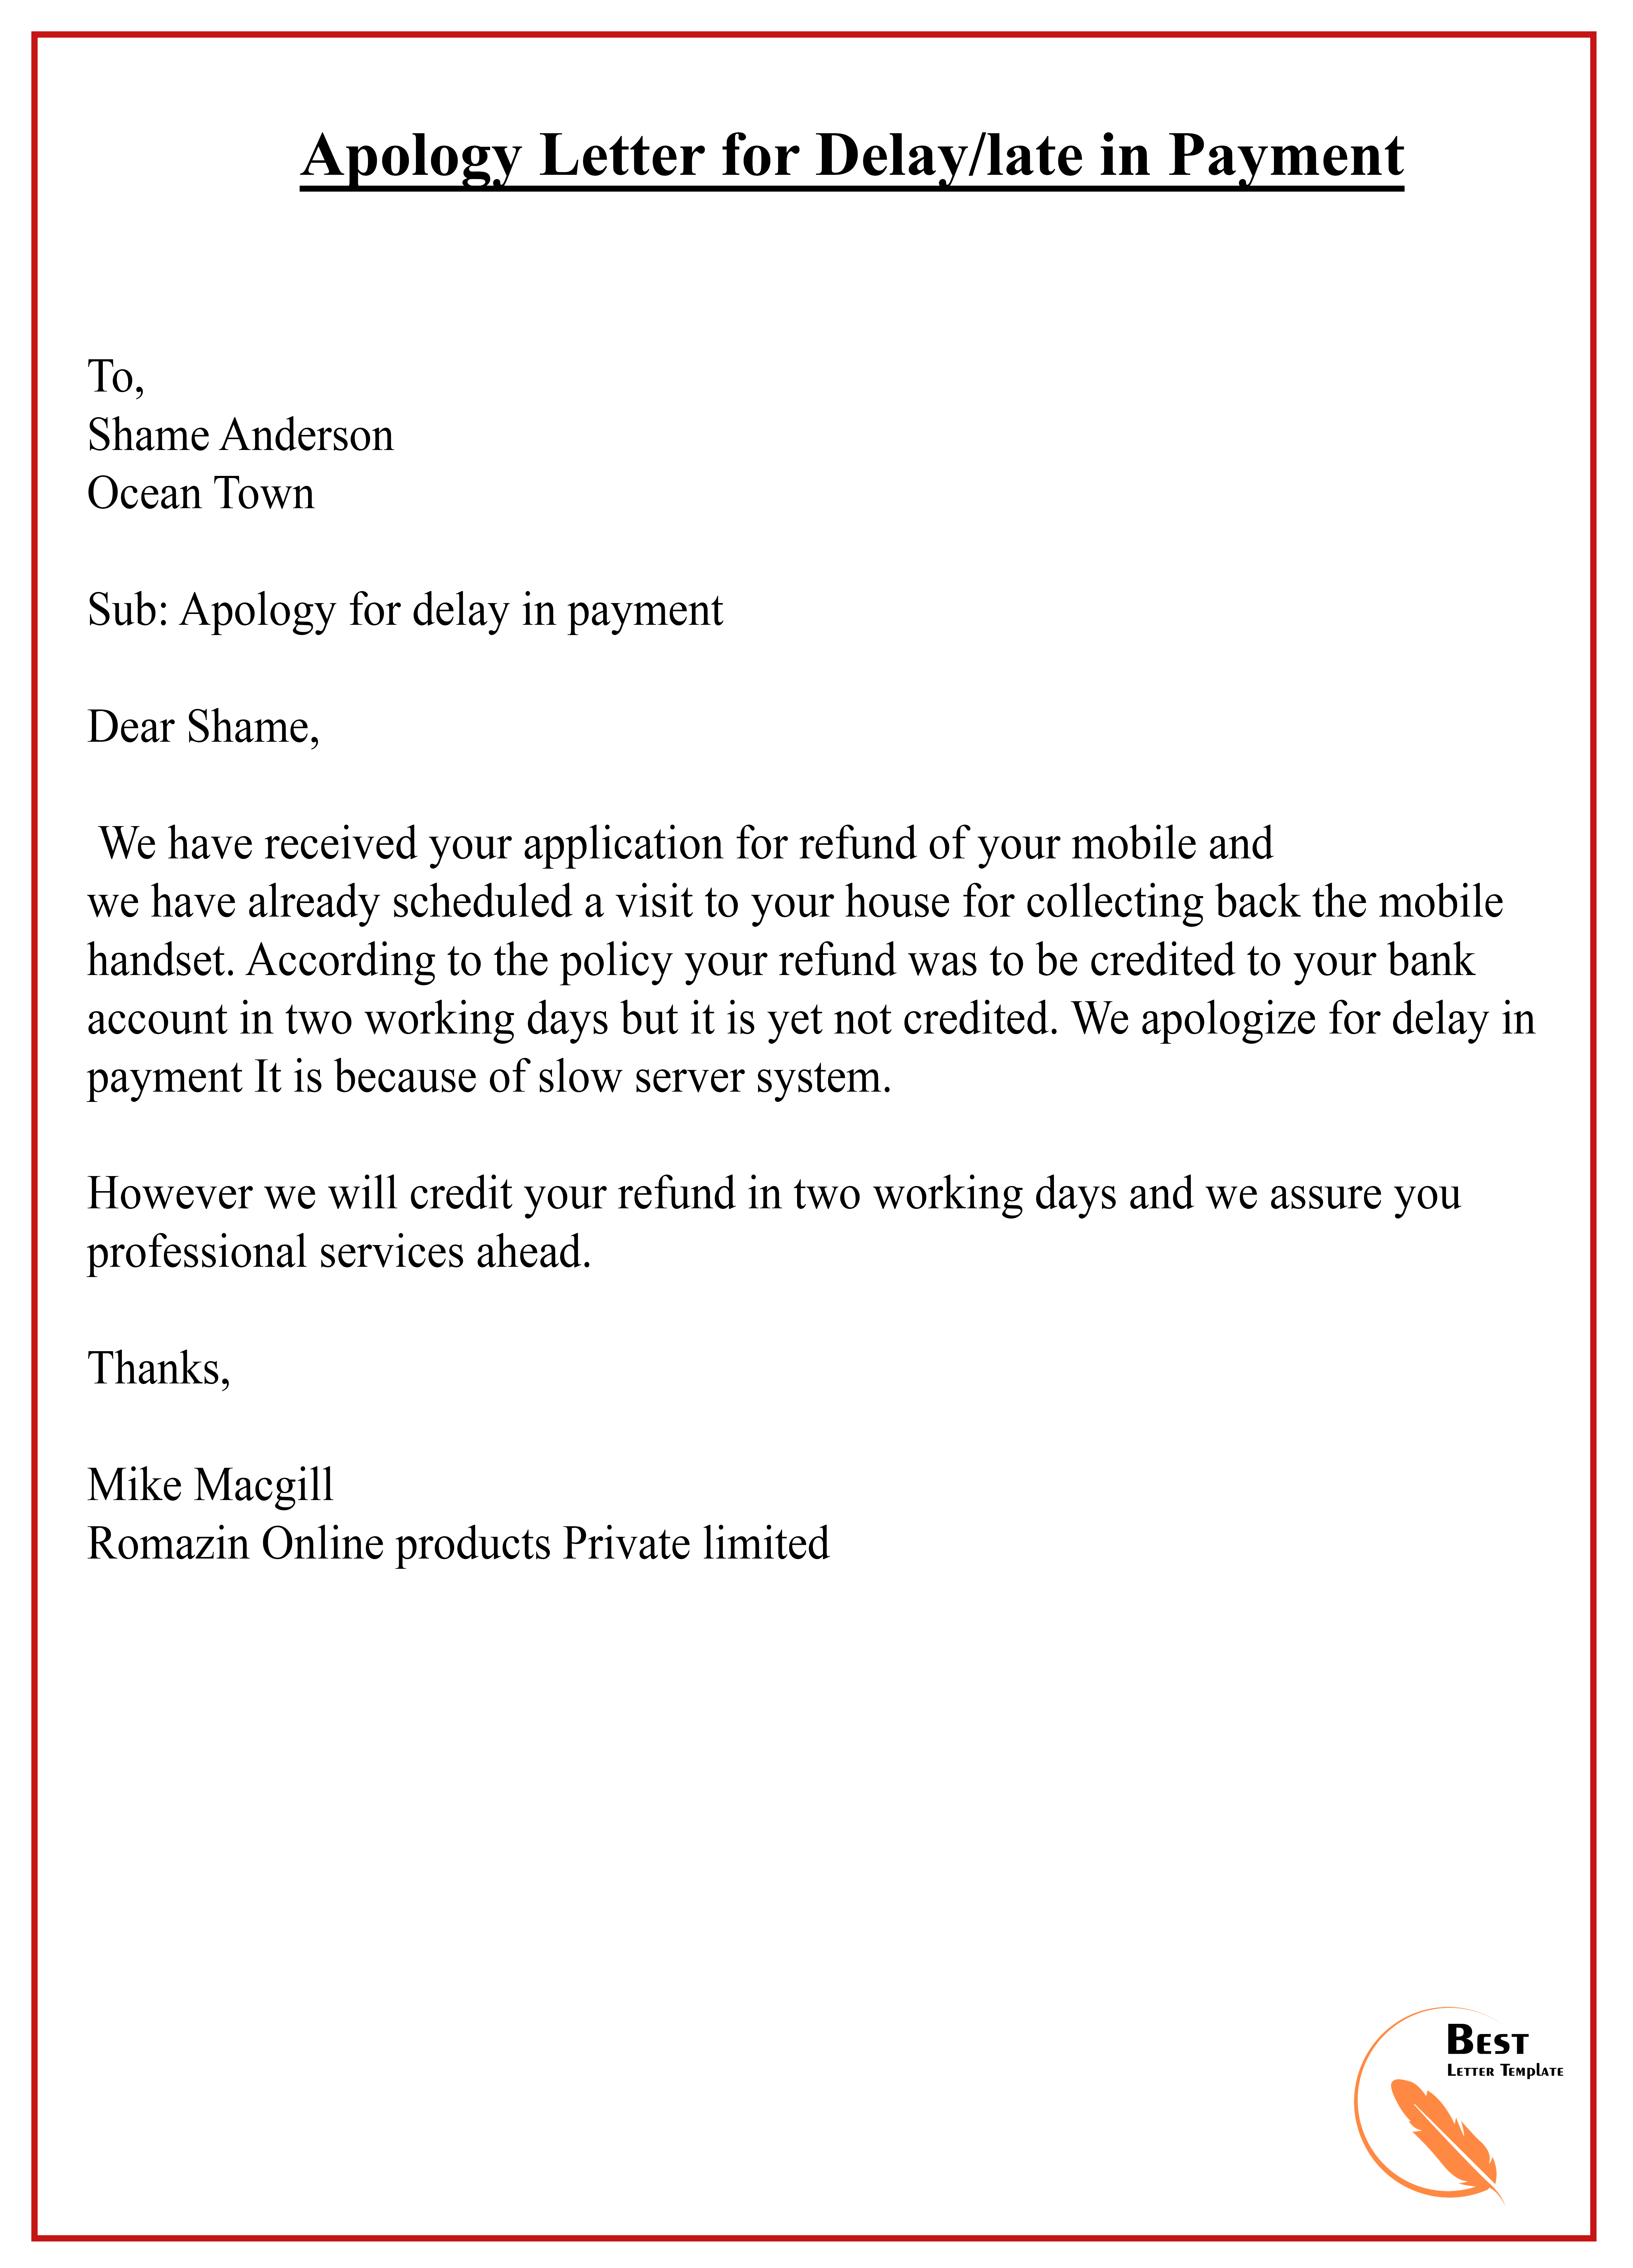 Late Payment Letter Template from bestlettertemplate.com